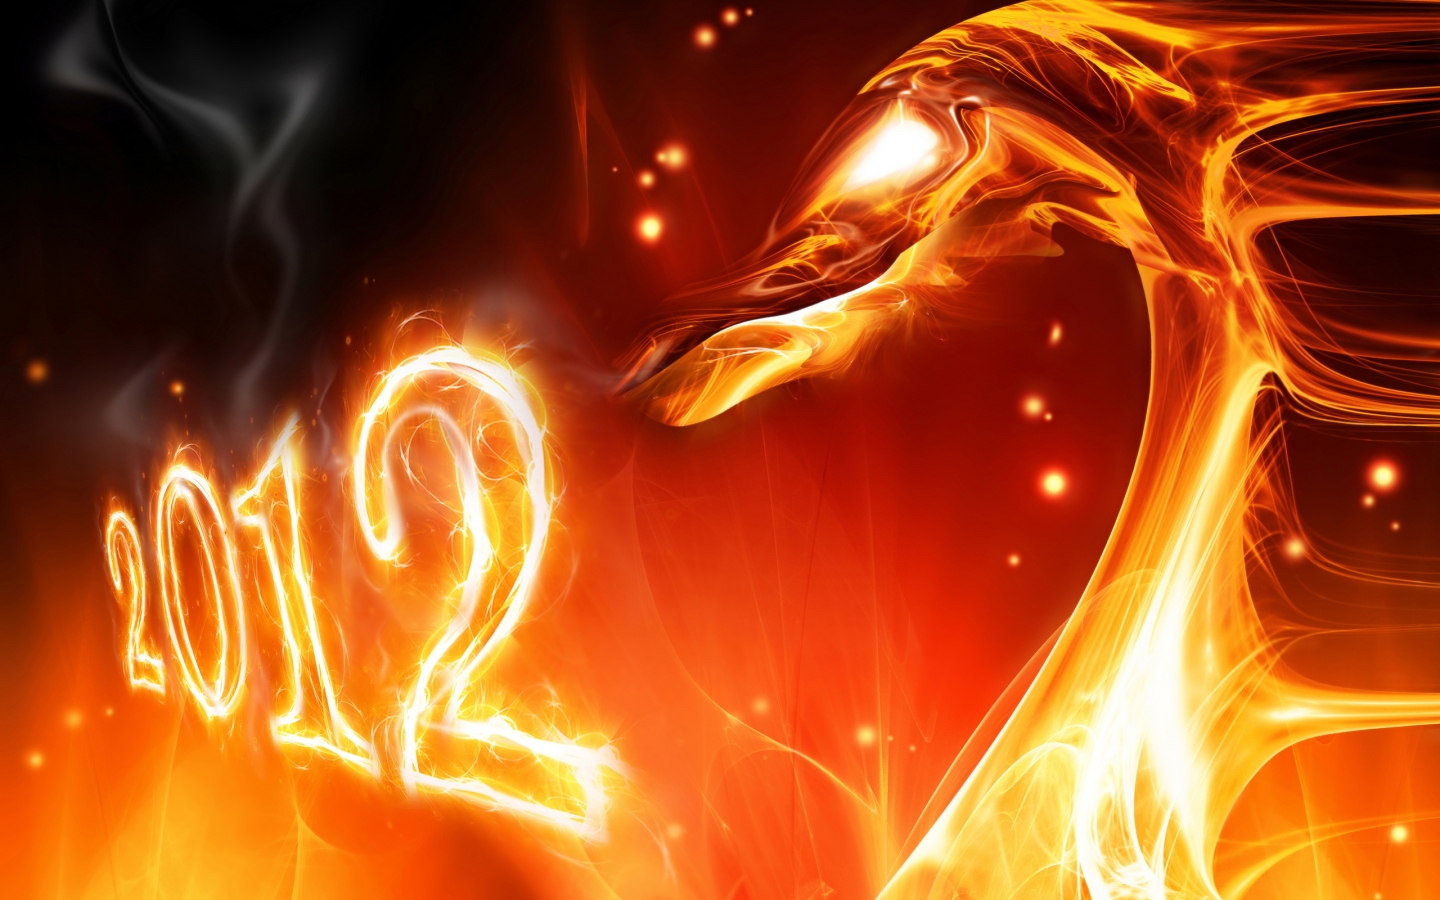 2012 Dragon Year for 1440 x 900 widescreen resolution